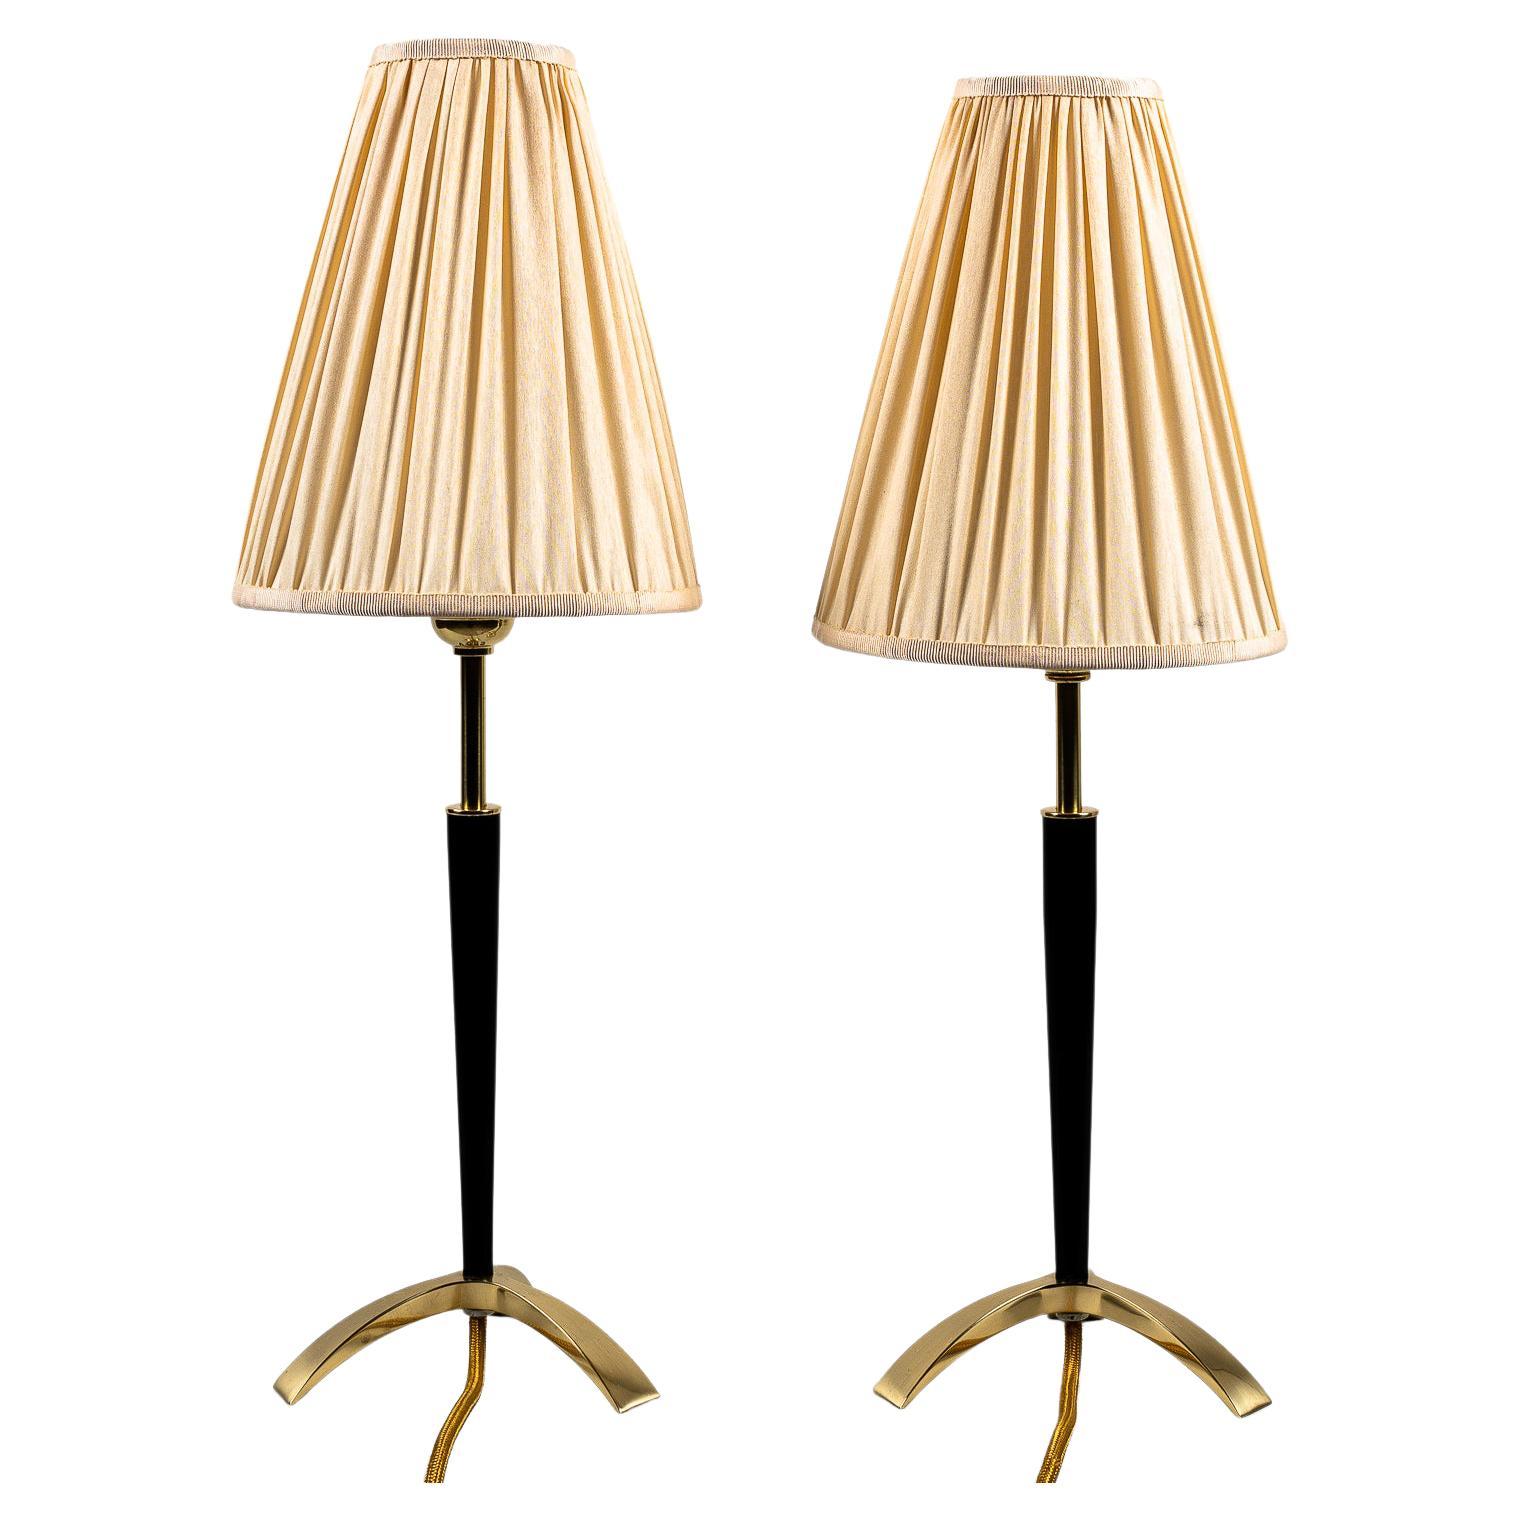 Two Extendable Table Lamps by J.T. Kalmar, circa 1950s